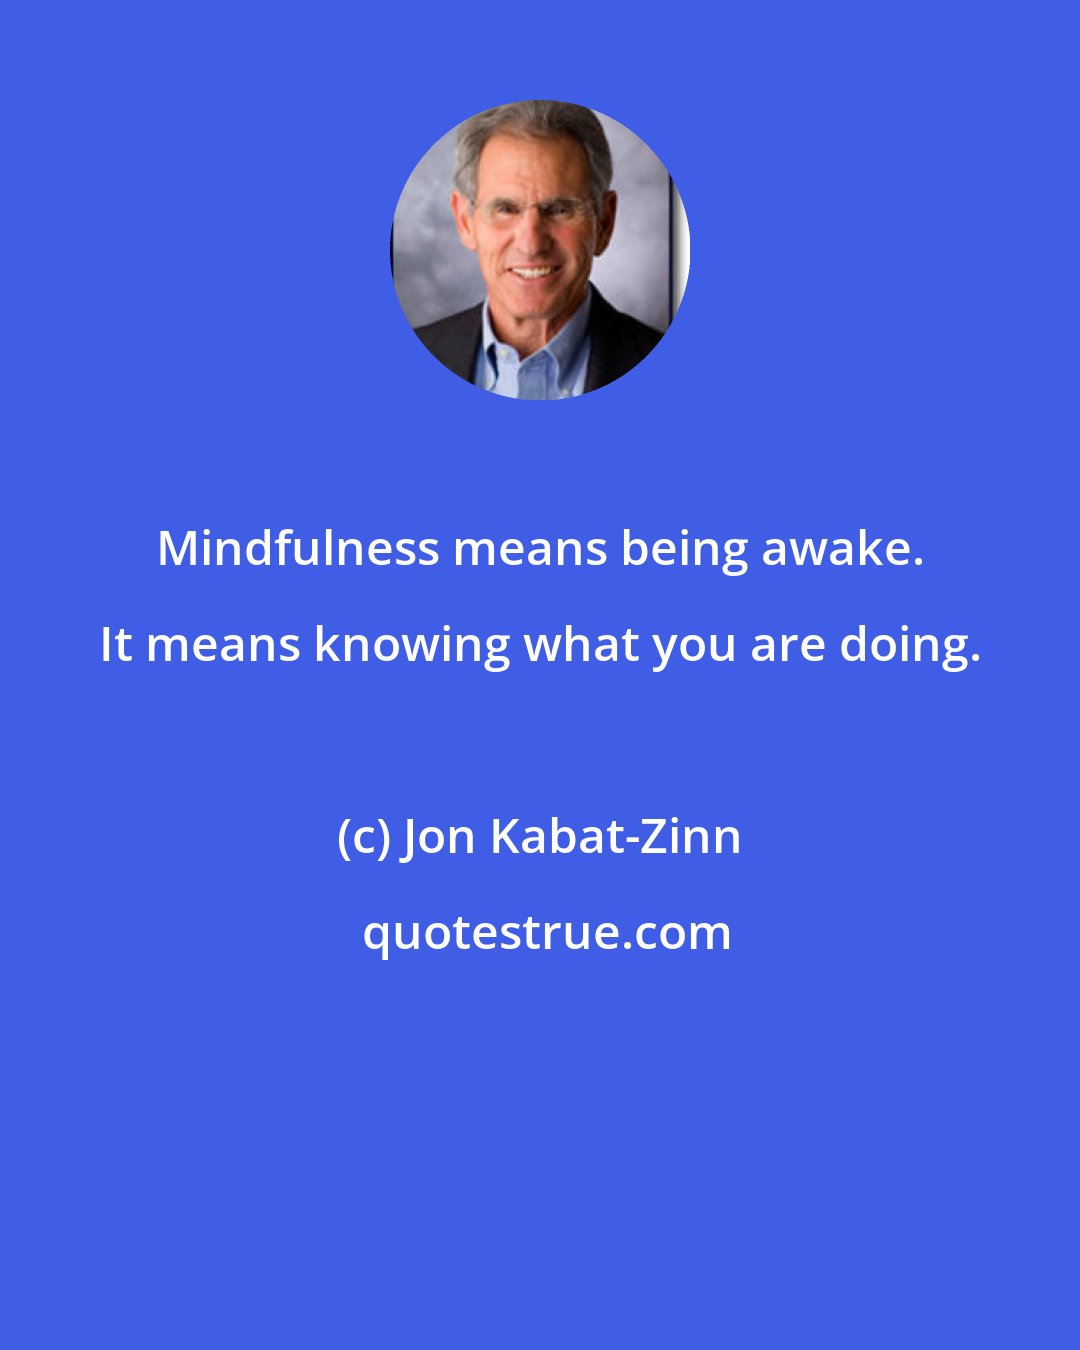 Jon Kabat-Zinn: Mindfulness means being awake. It means knowing what you are doing.